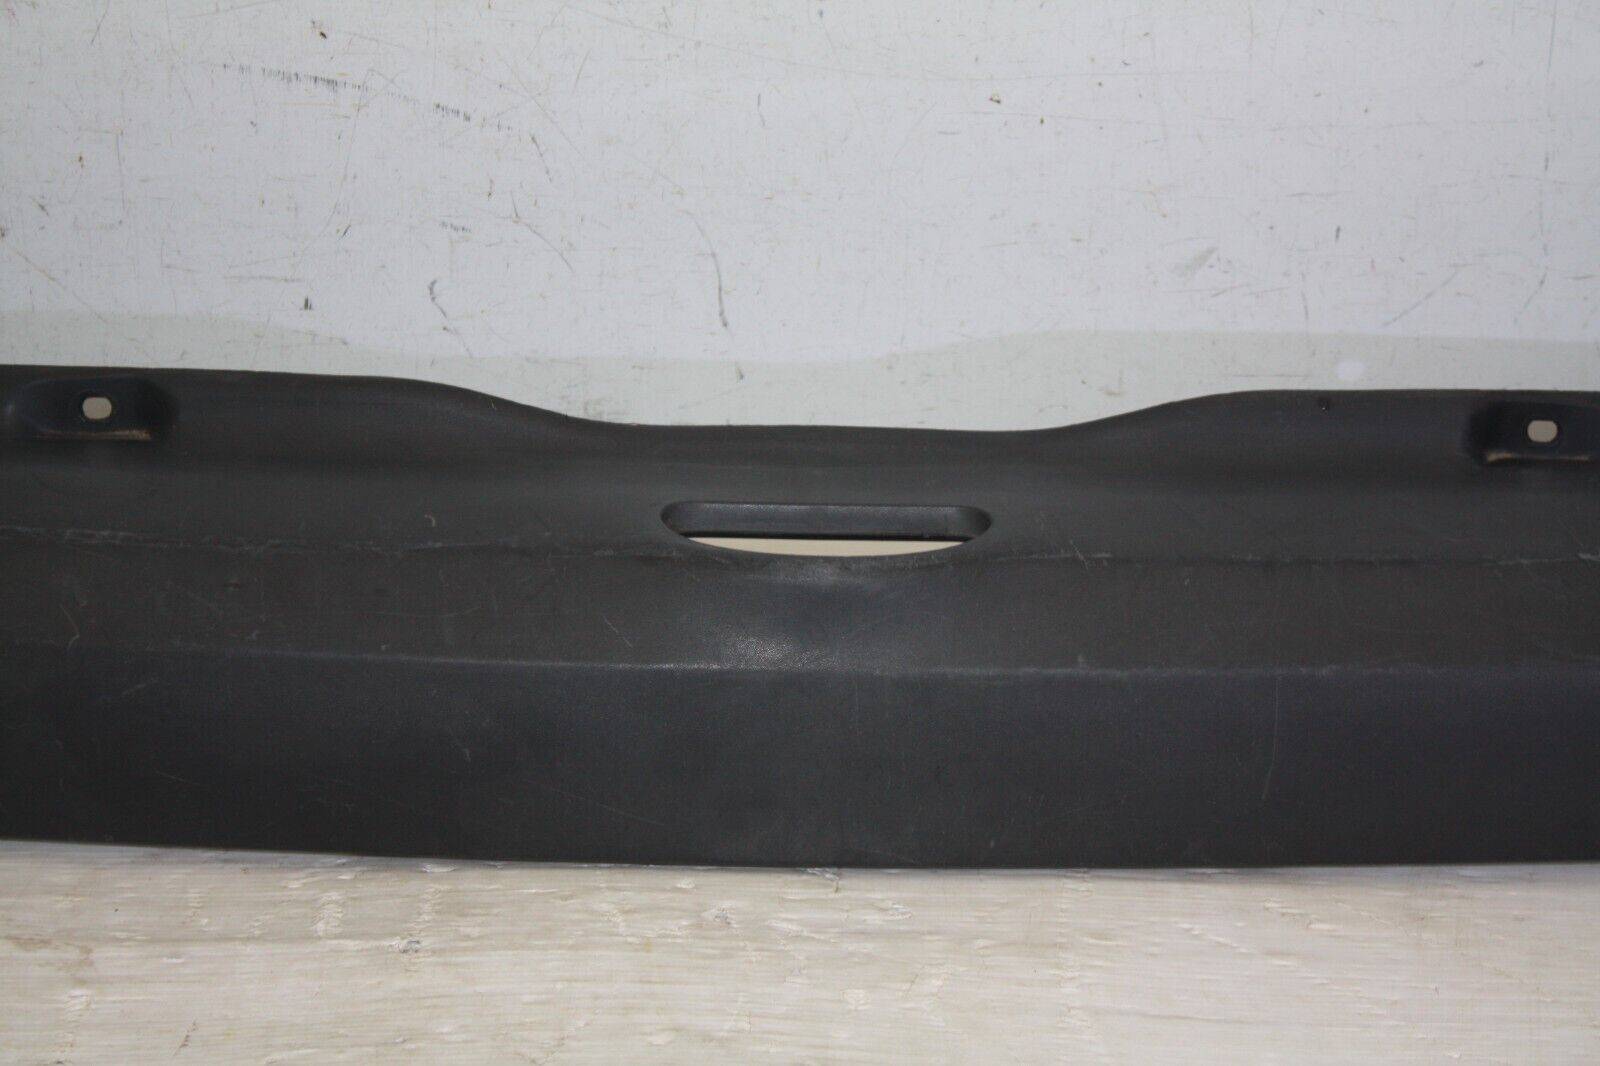 Renault-Clio-Rear-Bumper-Upper-Section-2001-TO-2005-8200083217-Genuine-176093485781-4